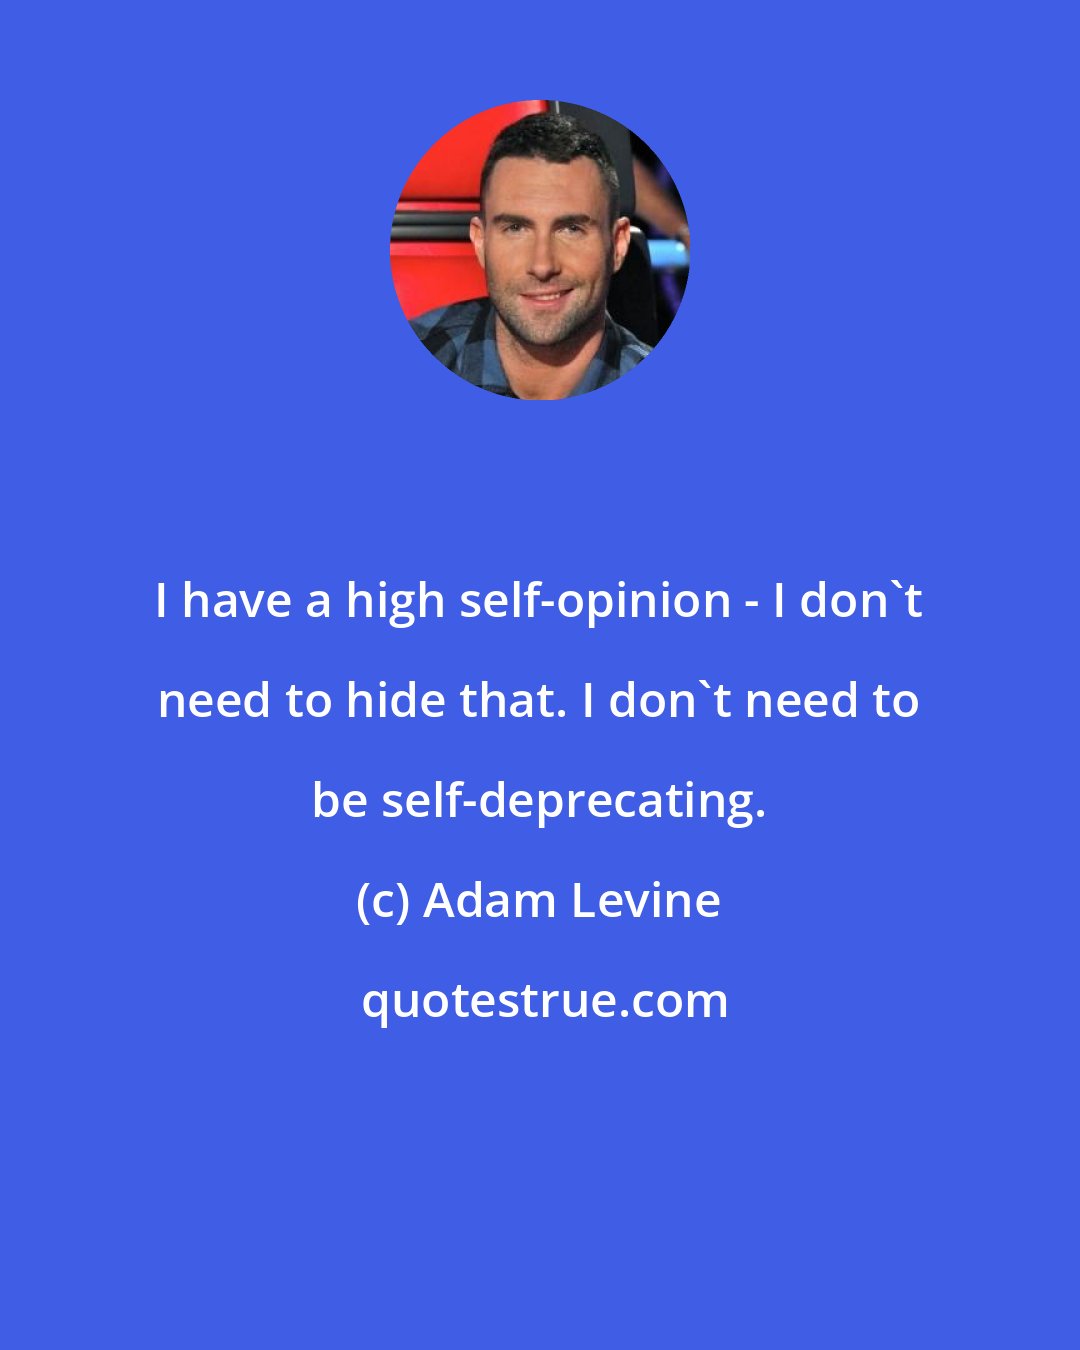 Adam Levine: I have a high self-opinion - I don't need to hide that. I don't need to be self-deprecating.